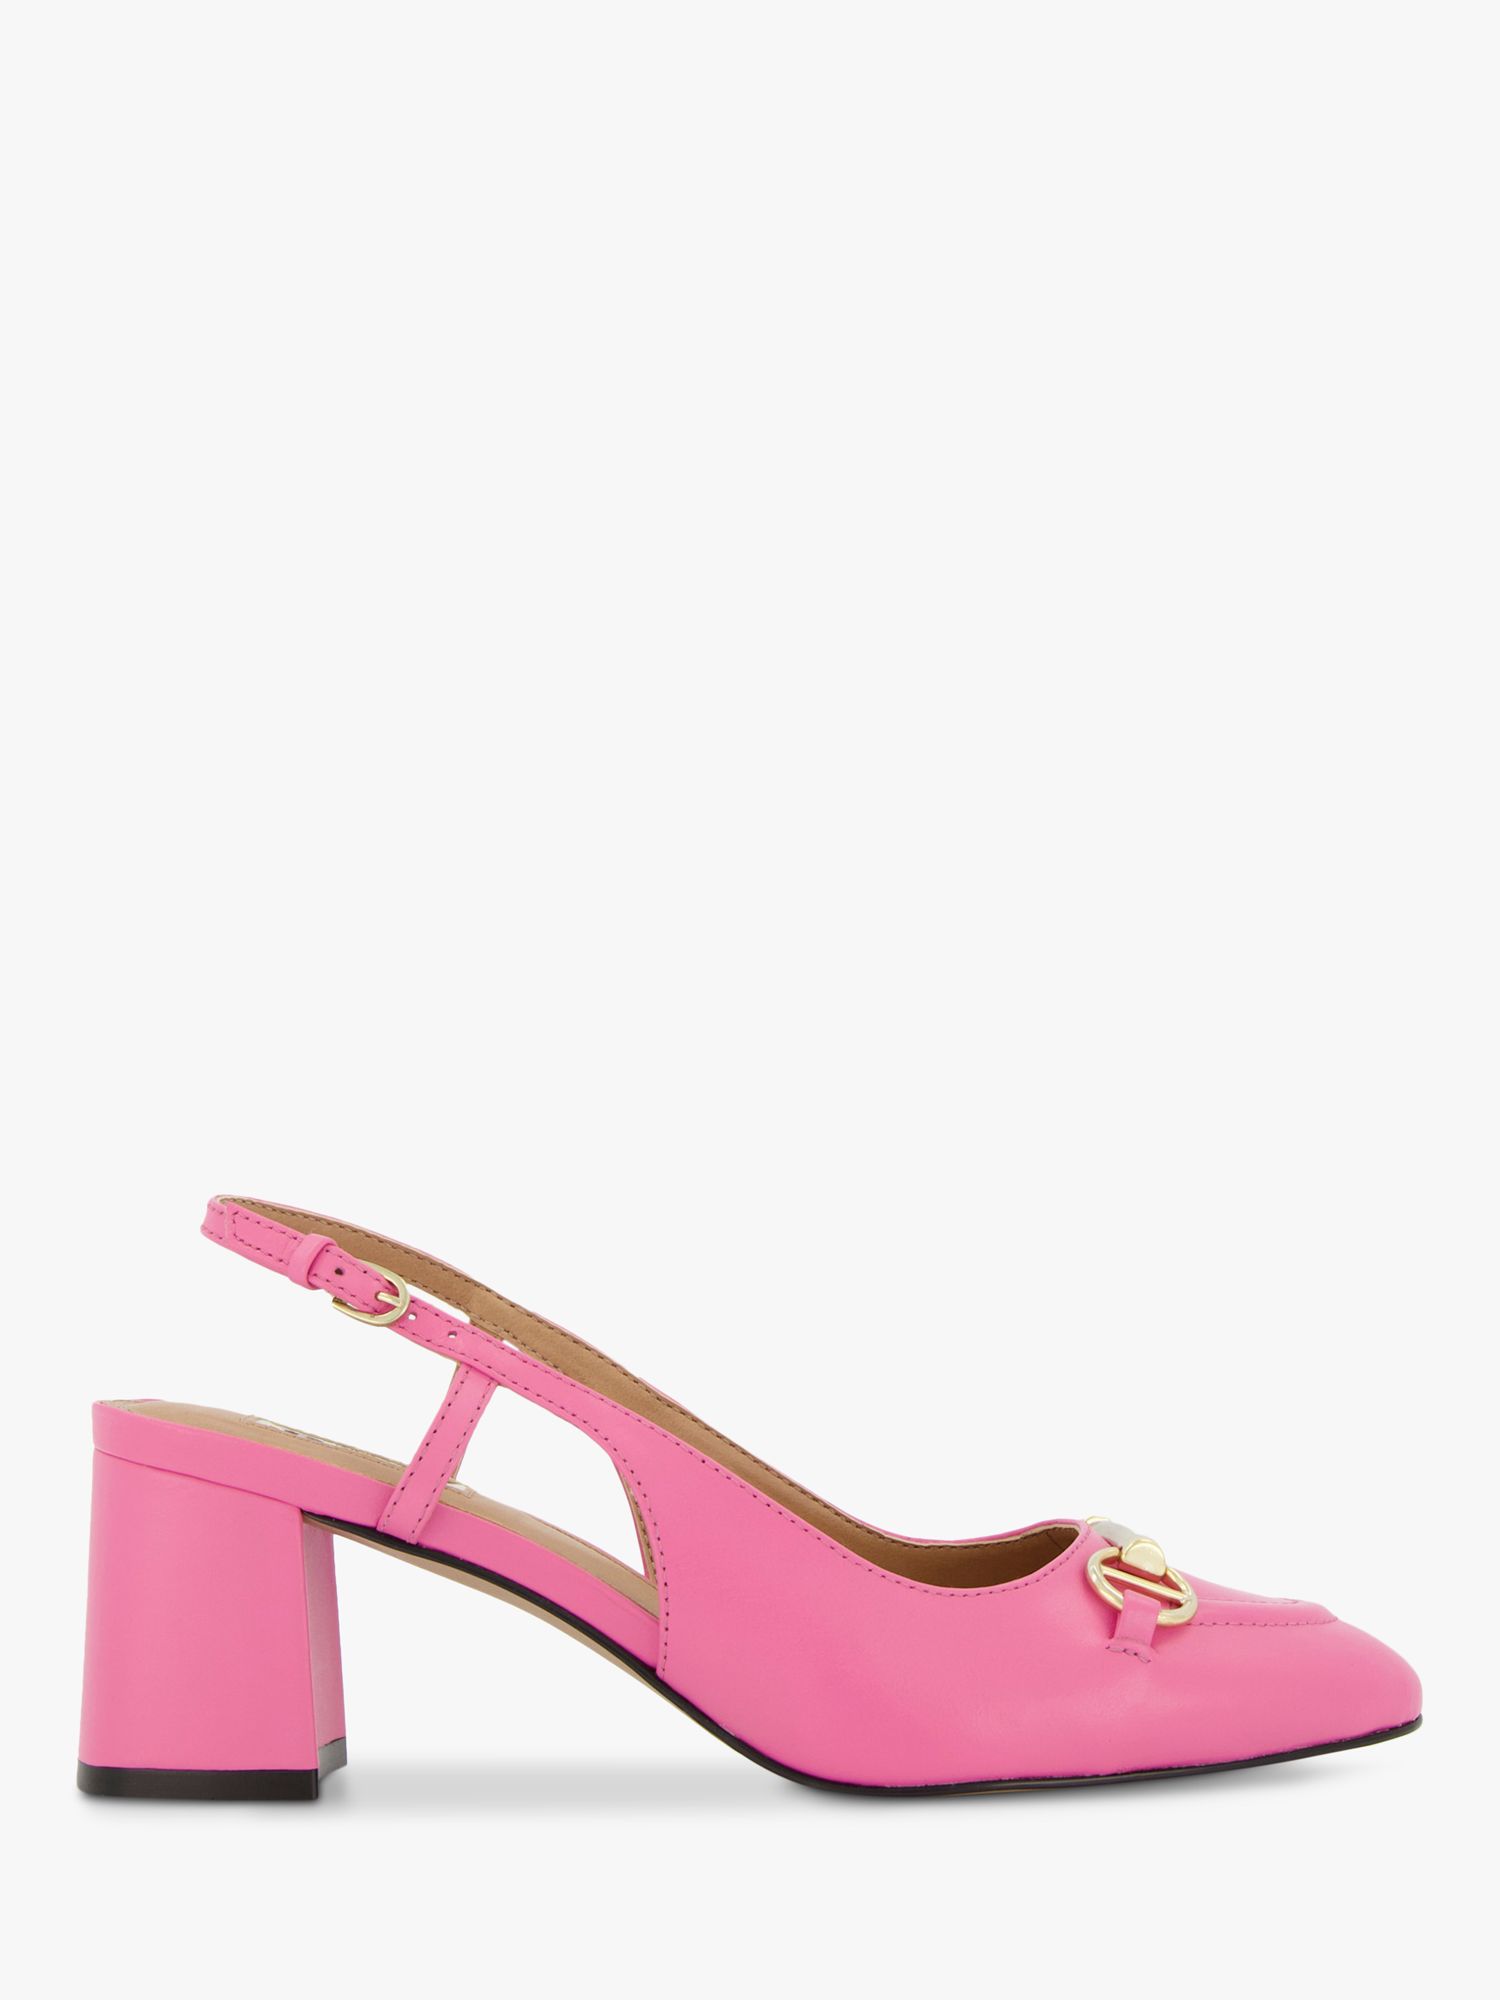 Dune Cassie Leather Slingback Court Shoes, Pink at John Lewis & Partners